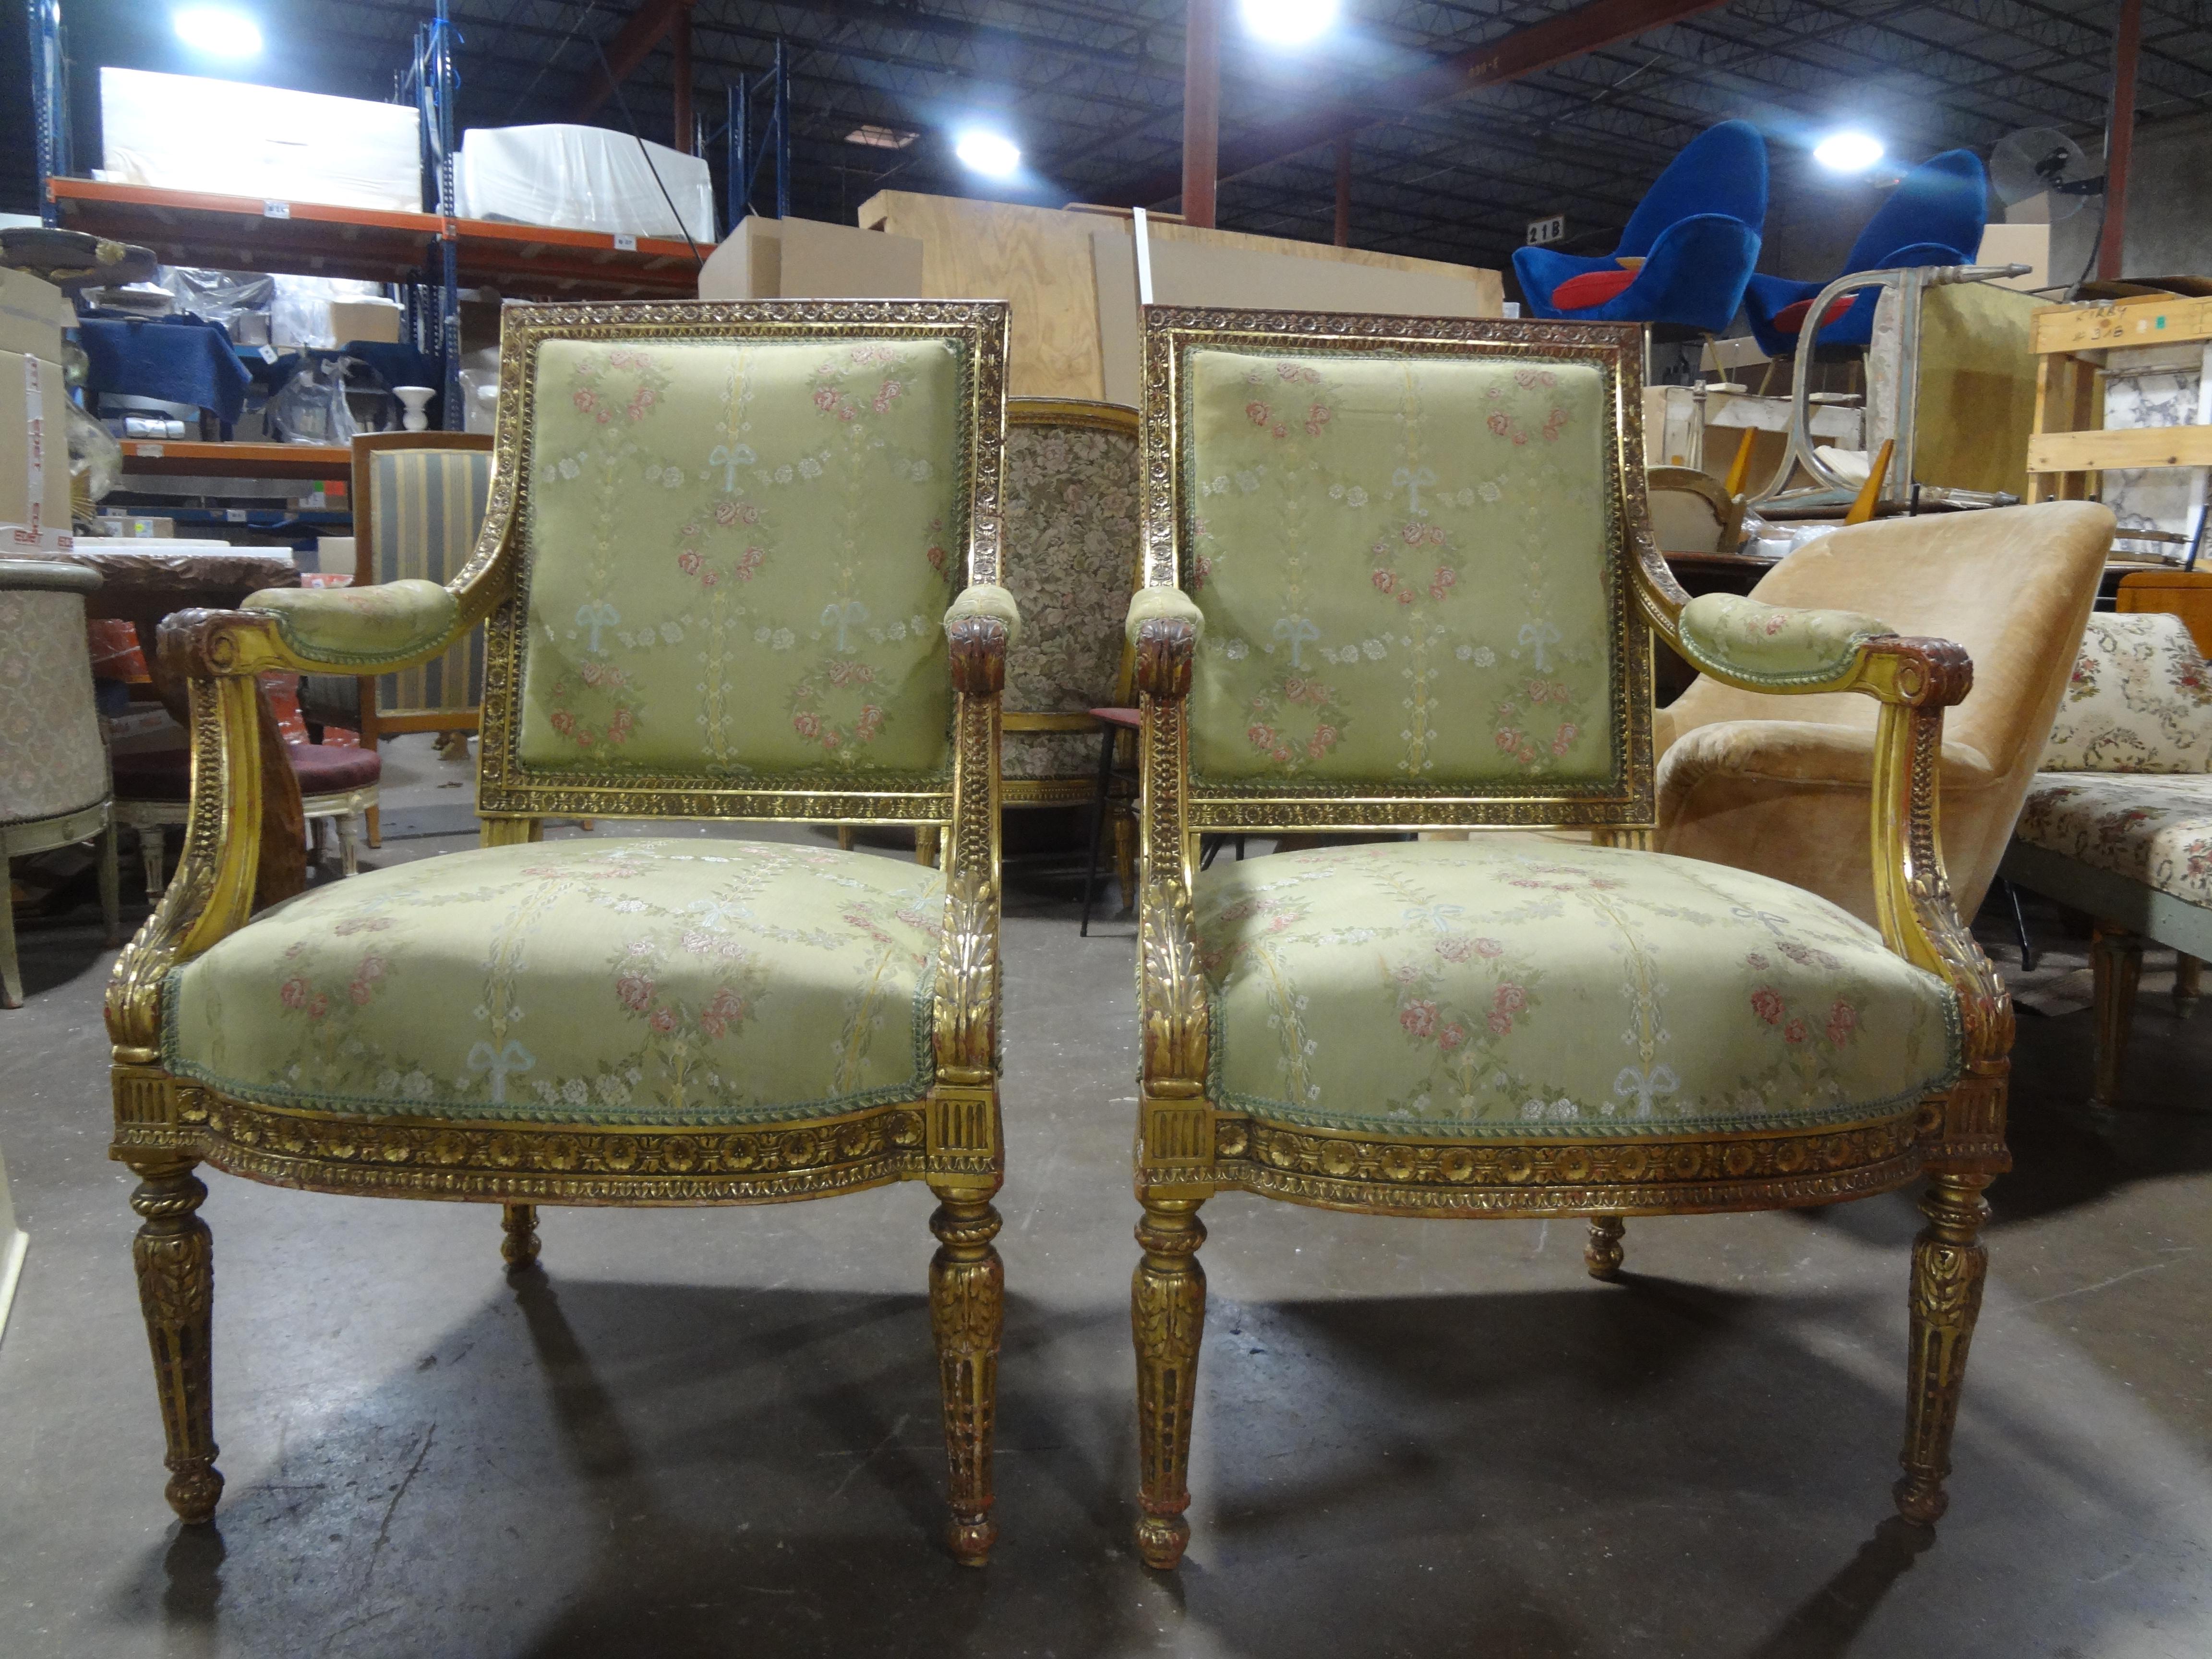 Pair Of 19th Century Italian Louis XVI Style Giltwood Chairs.
A glamorous pair of antique Italian Louis XVI style gilt wood chairs with excellent carving and beautiful original gilding.
Perfect side chairs or accent chairs. Great versatile design